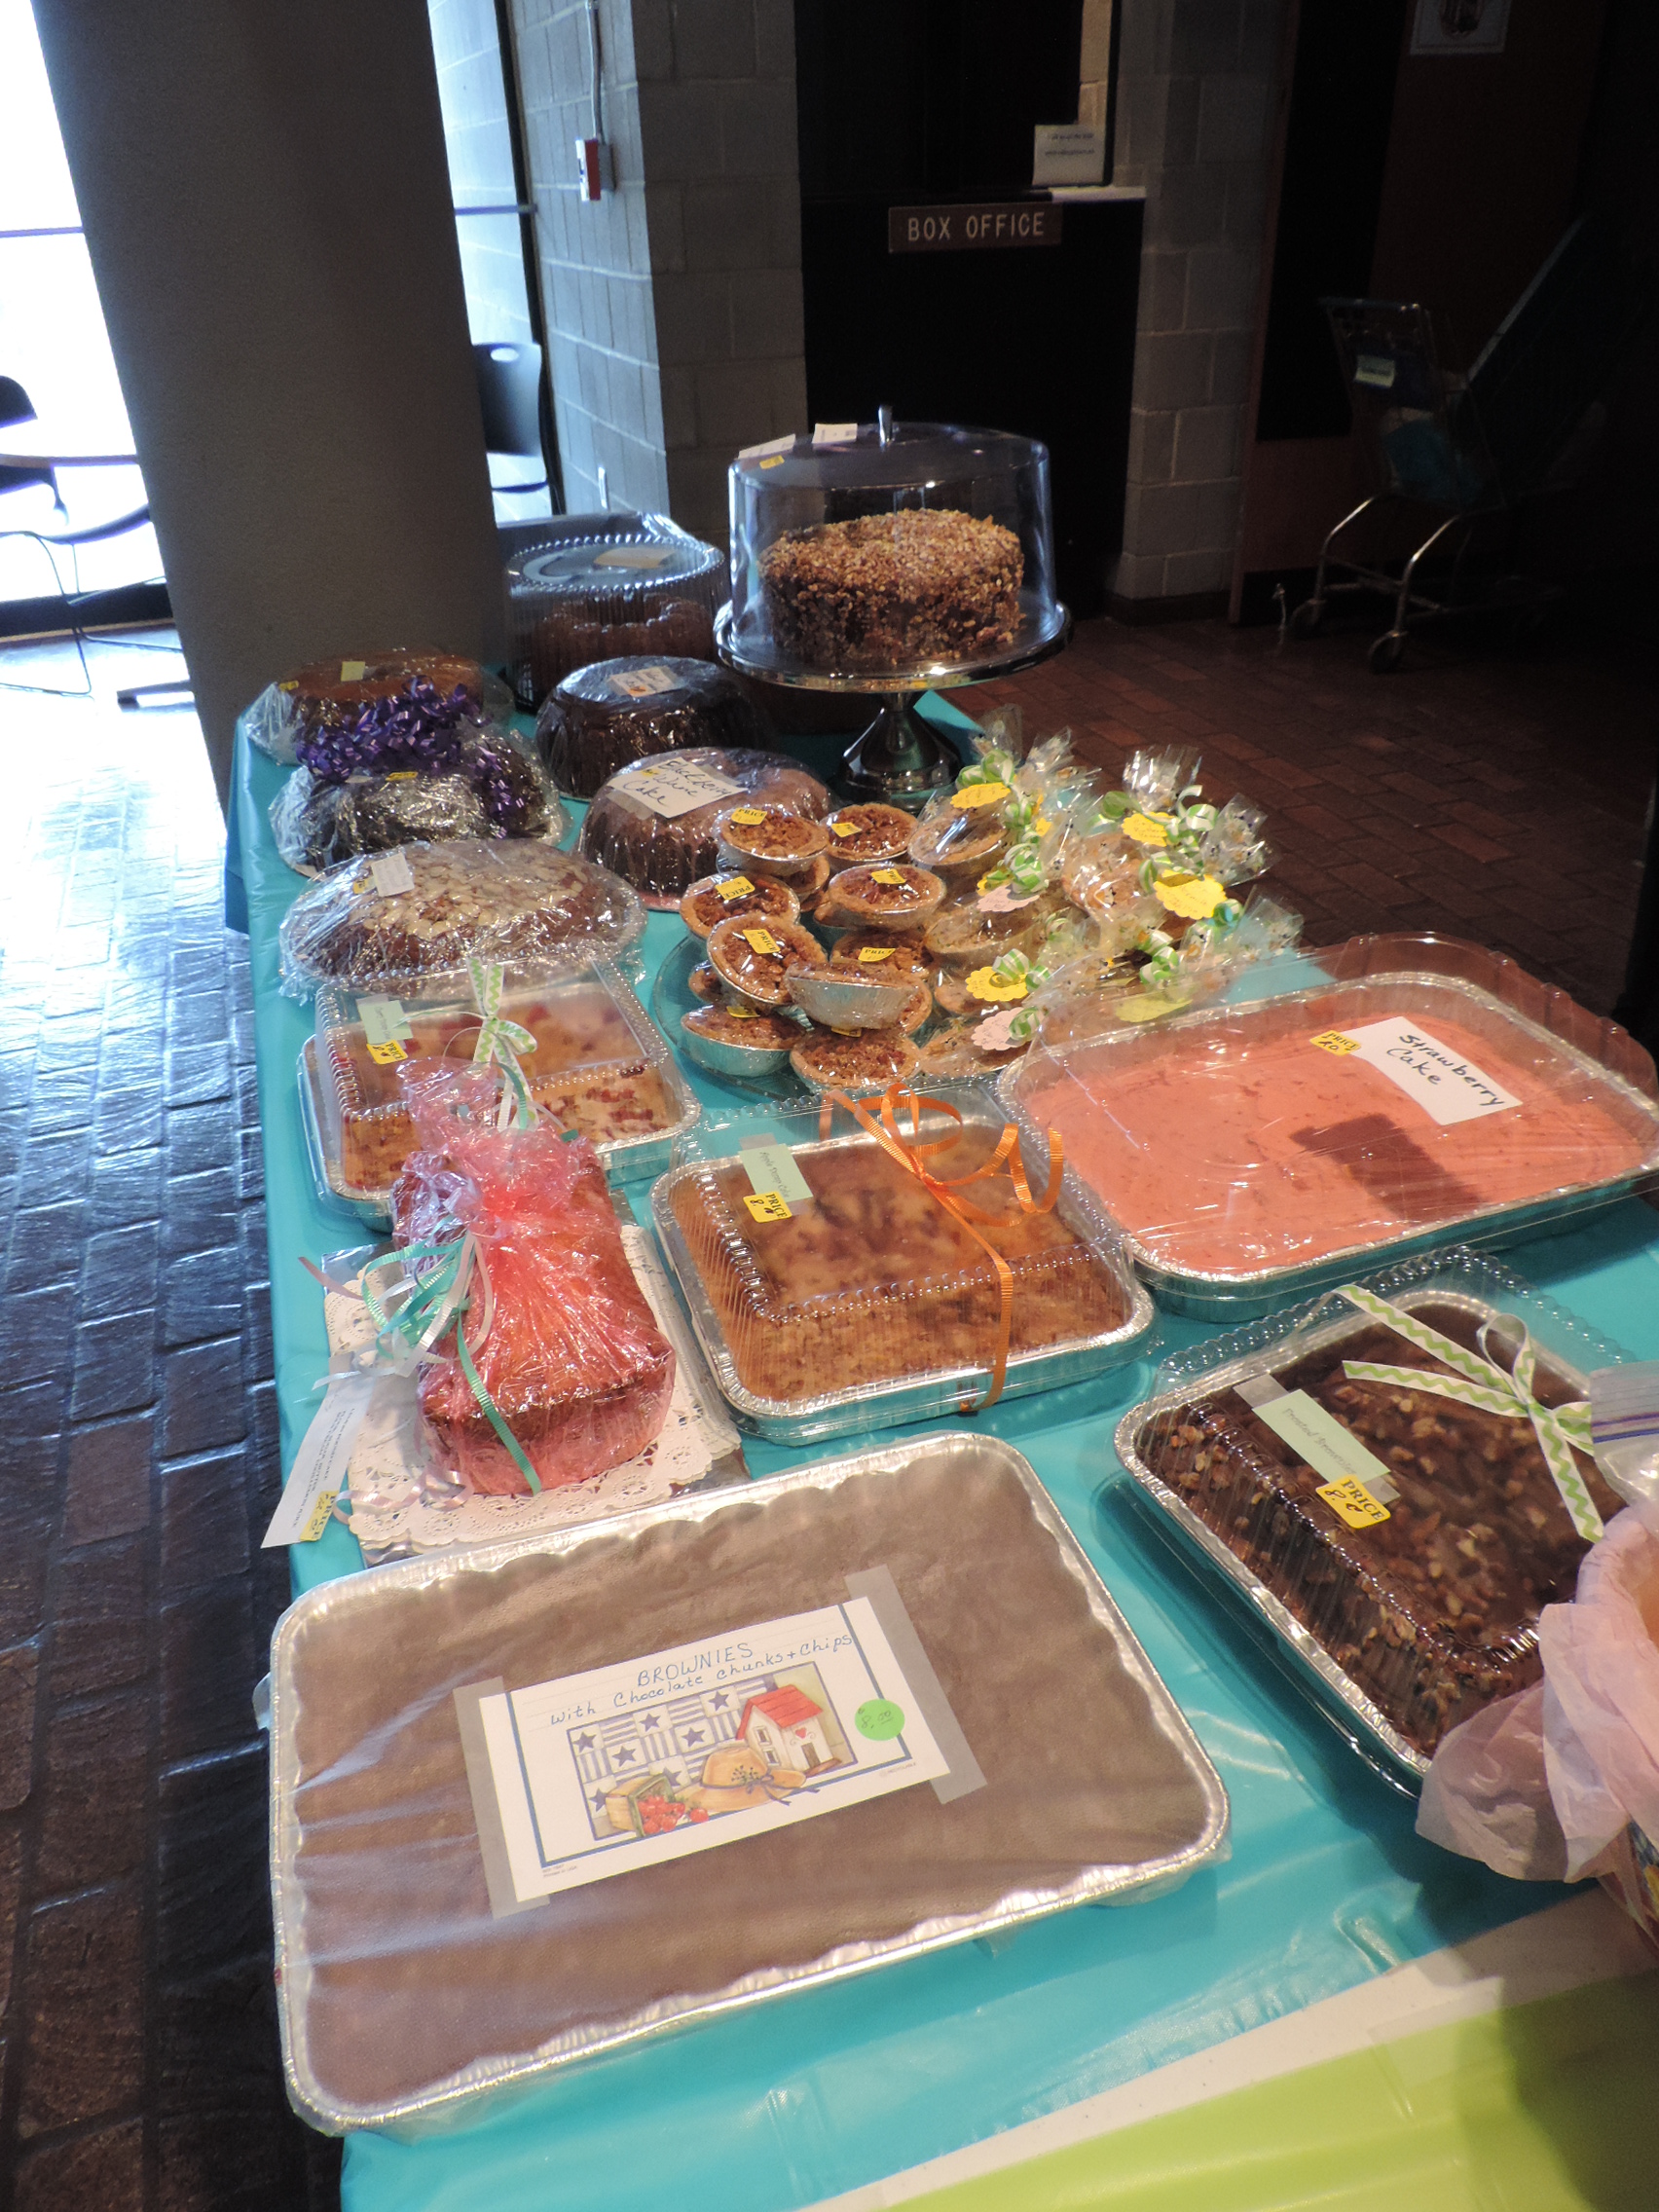 Library Bake Sale